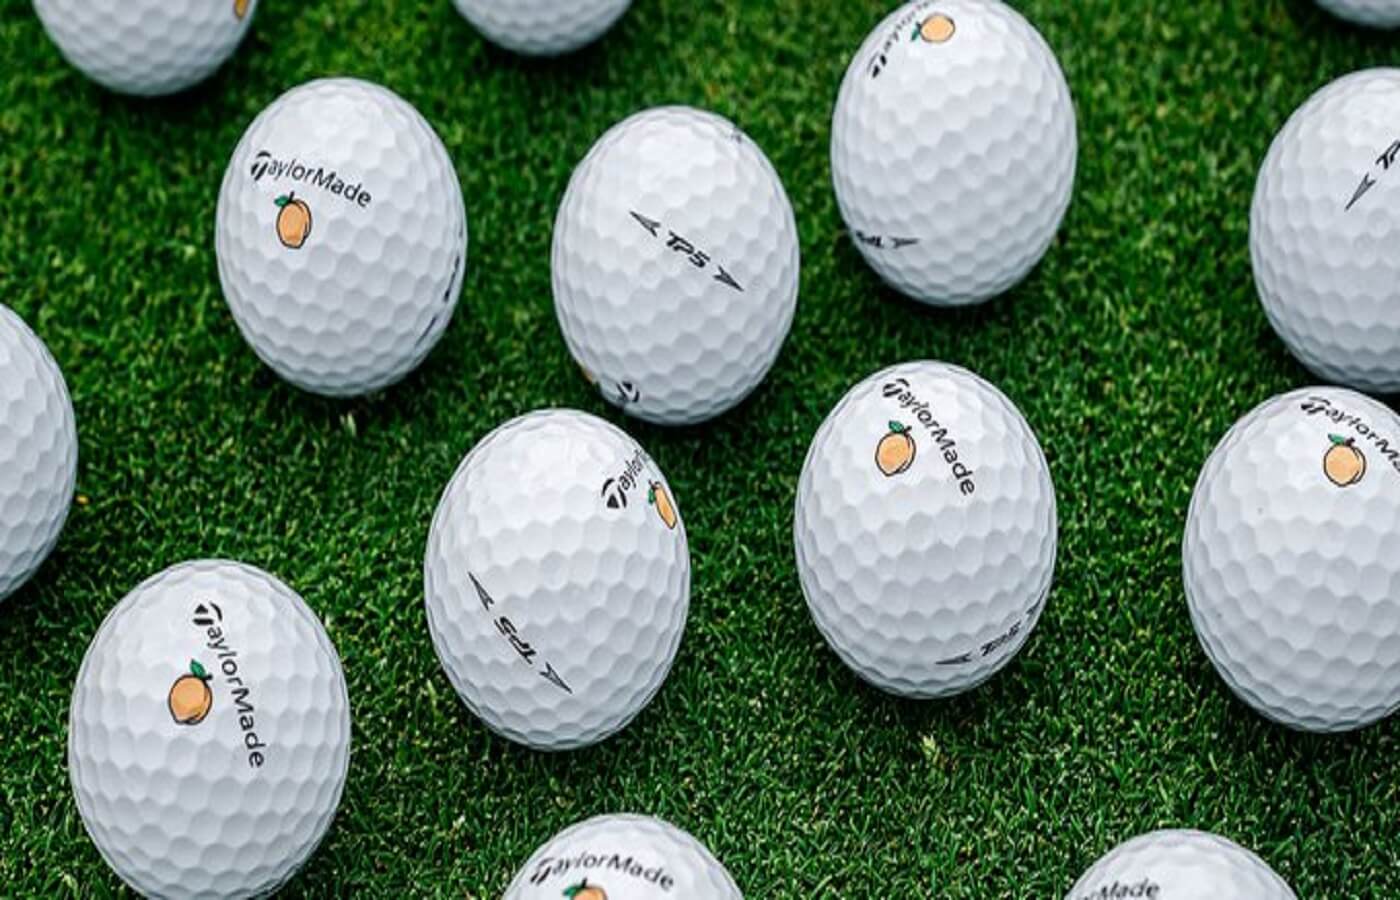 TaylorMade golf balls laying on grass